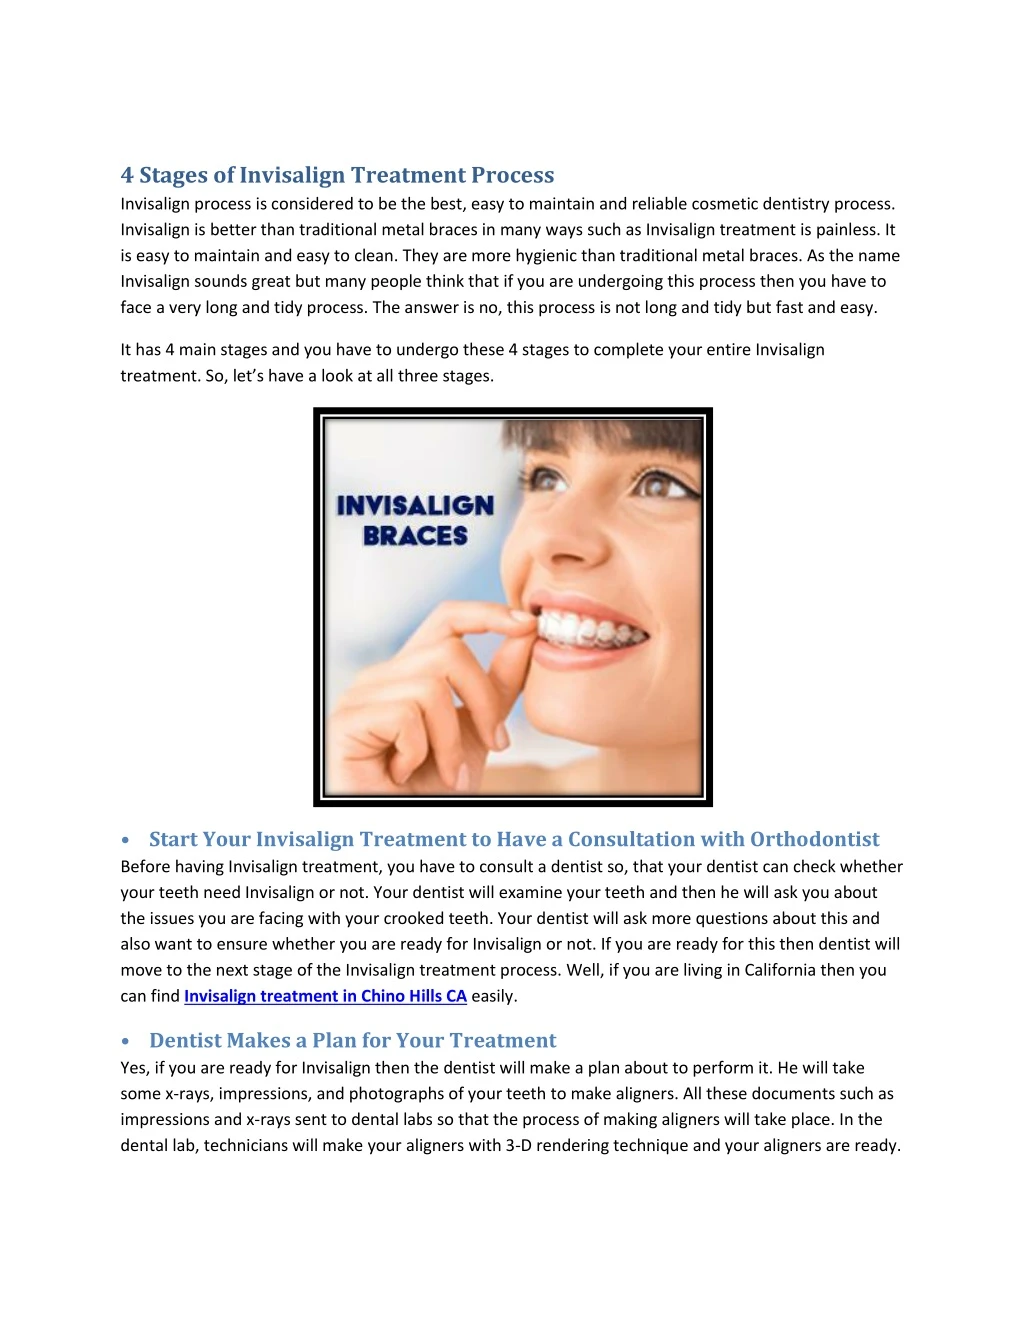 4 stages of invisalign treatment process